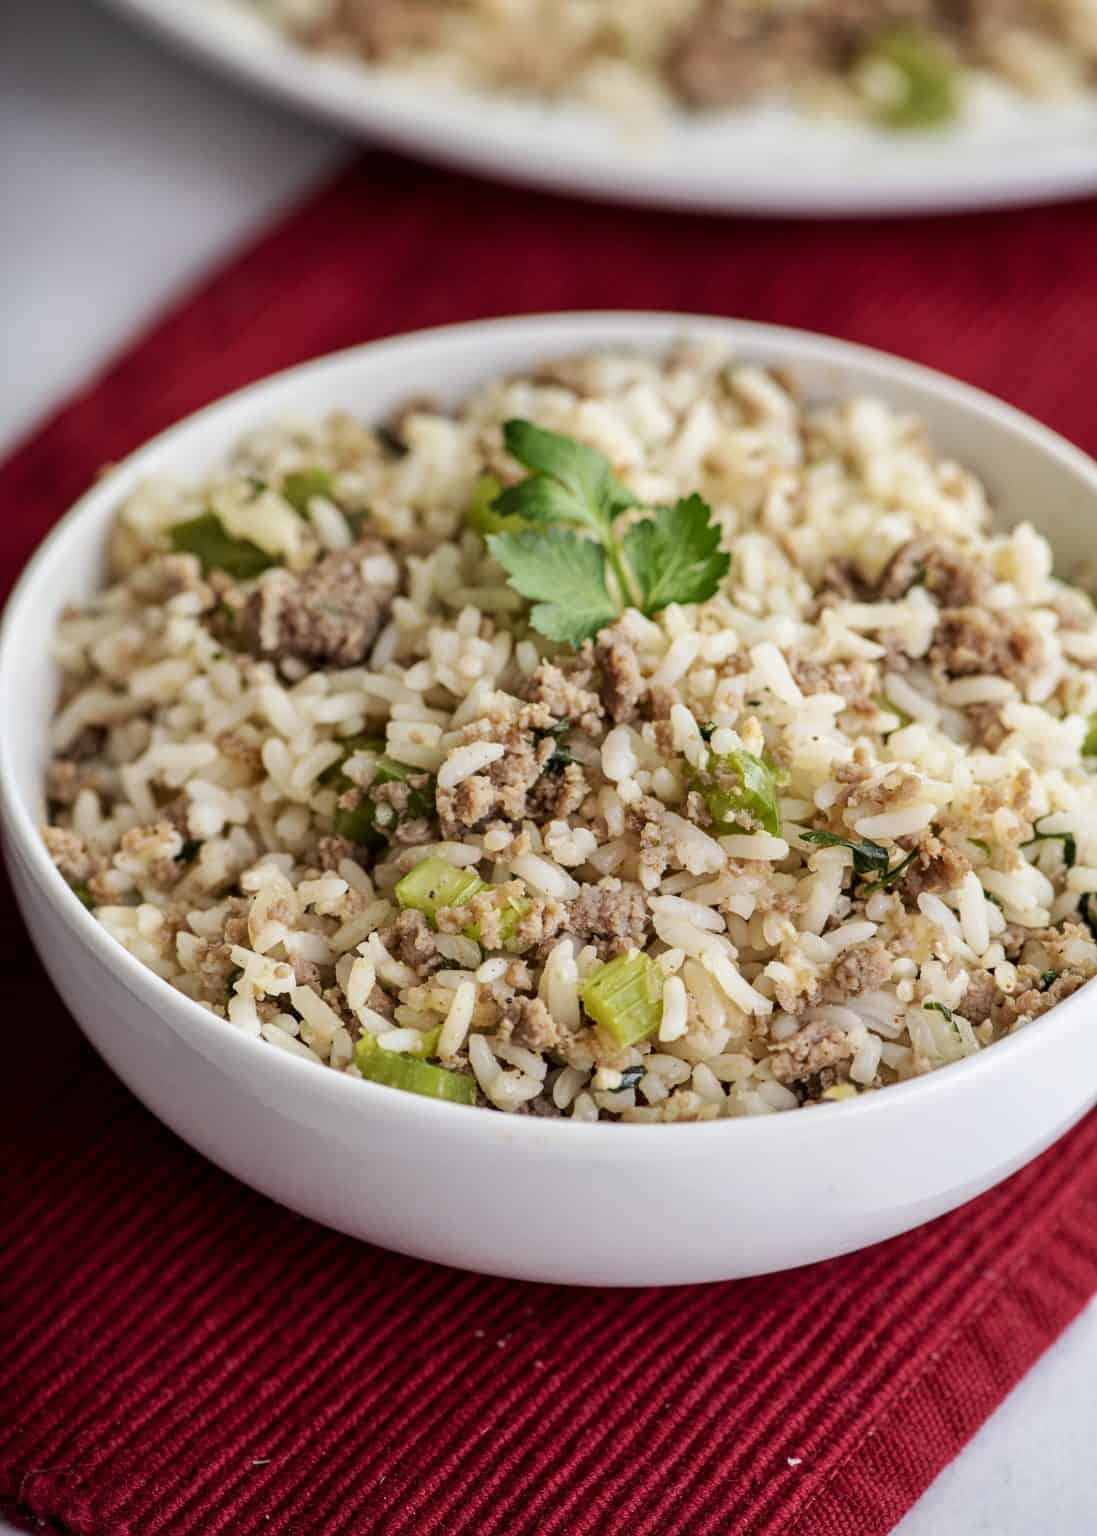 Recipe For Dirty Rice (Easy Homemade Version) - Southern Plate